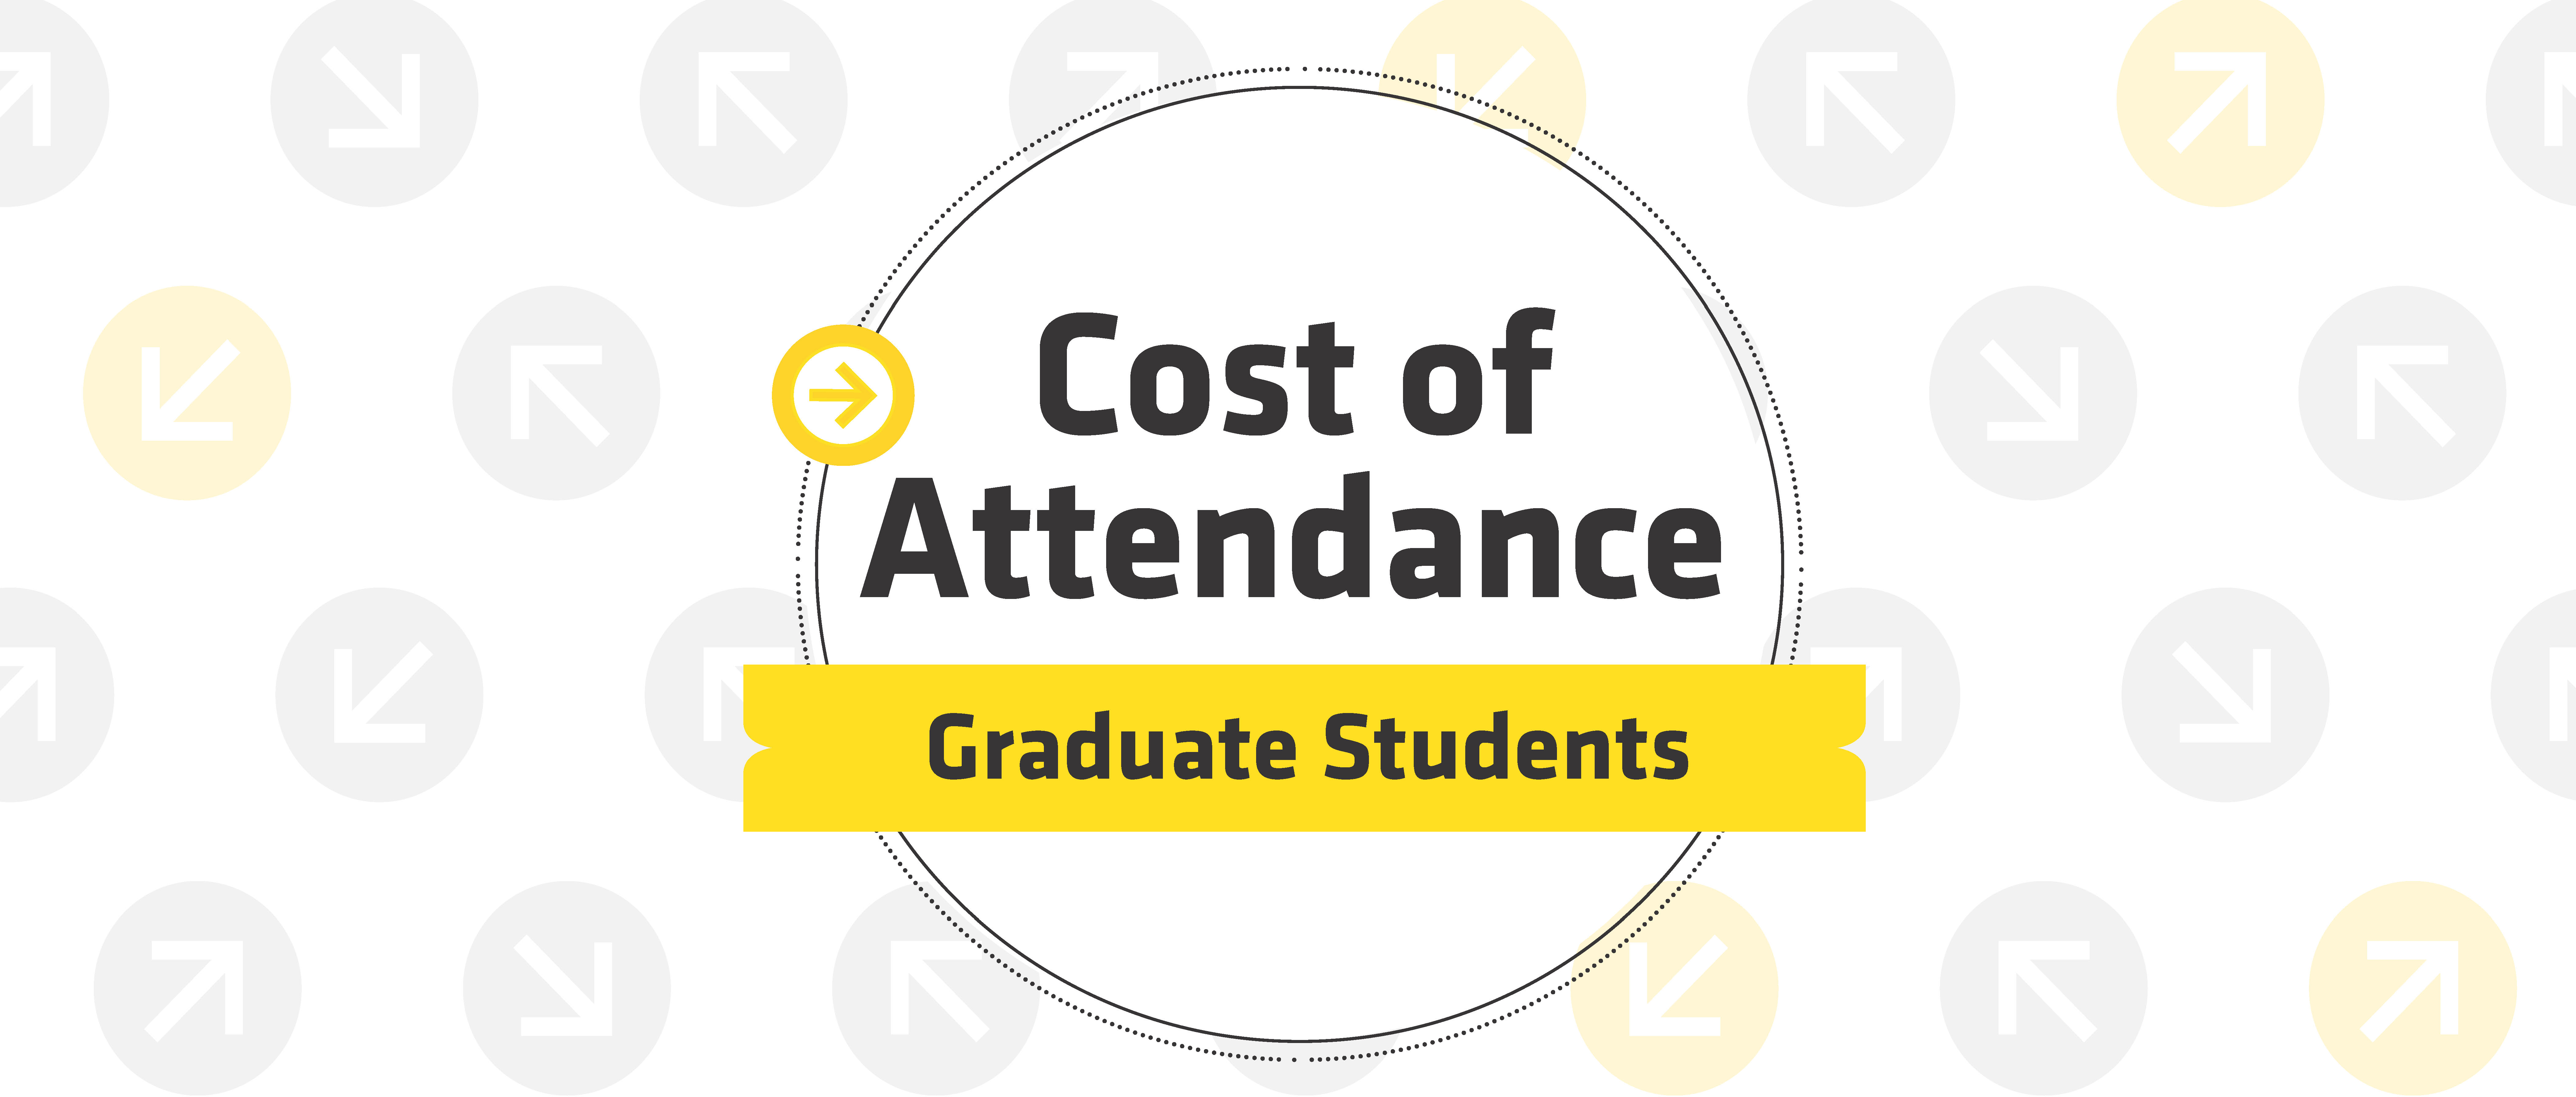 Text: Cost of Attendance for Graduate Students; circles and arrows in background